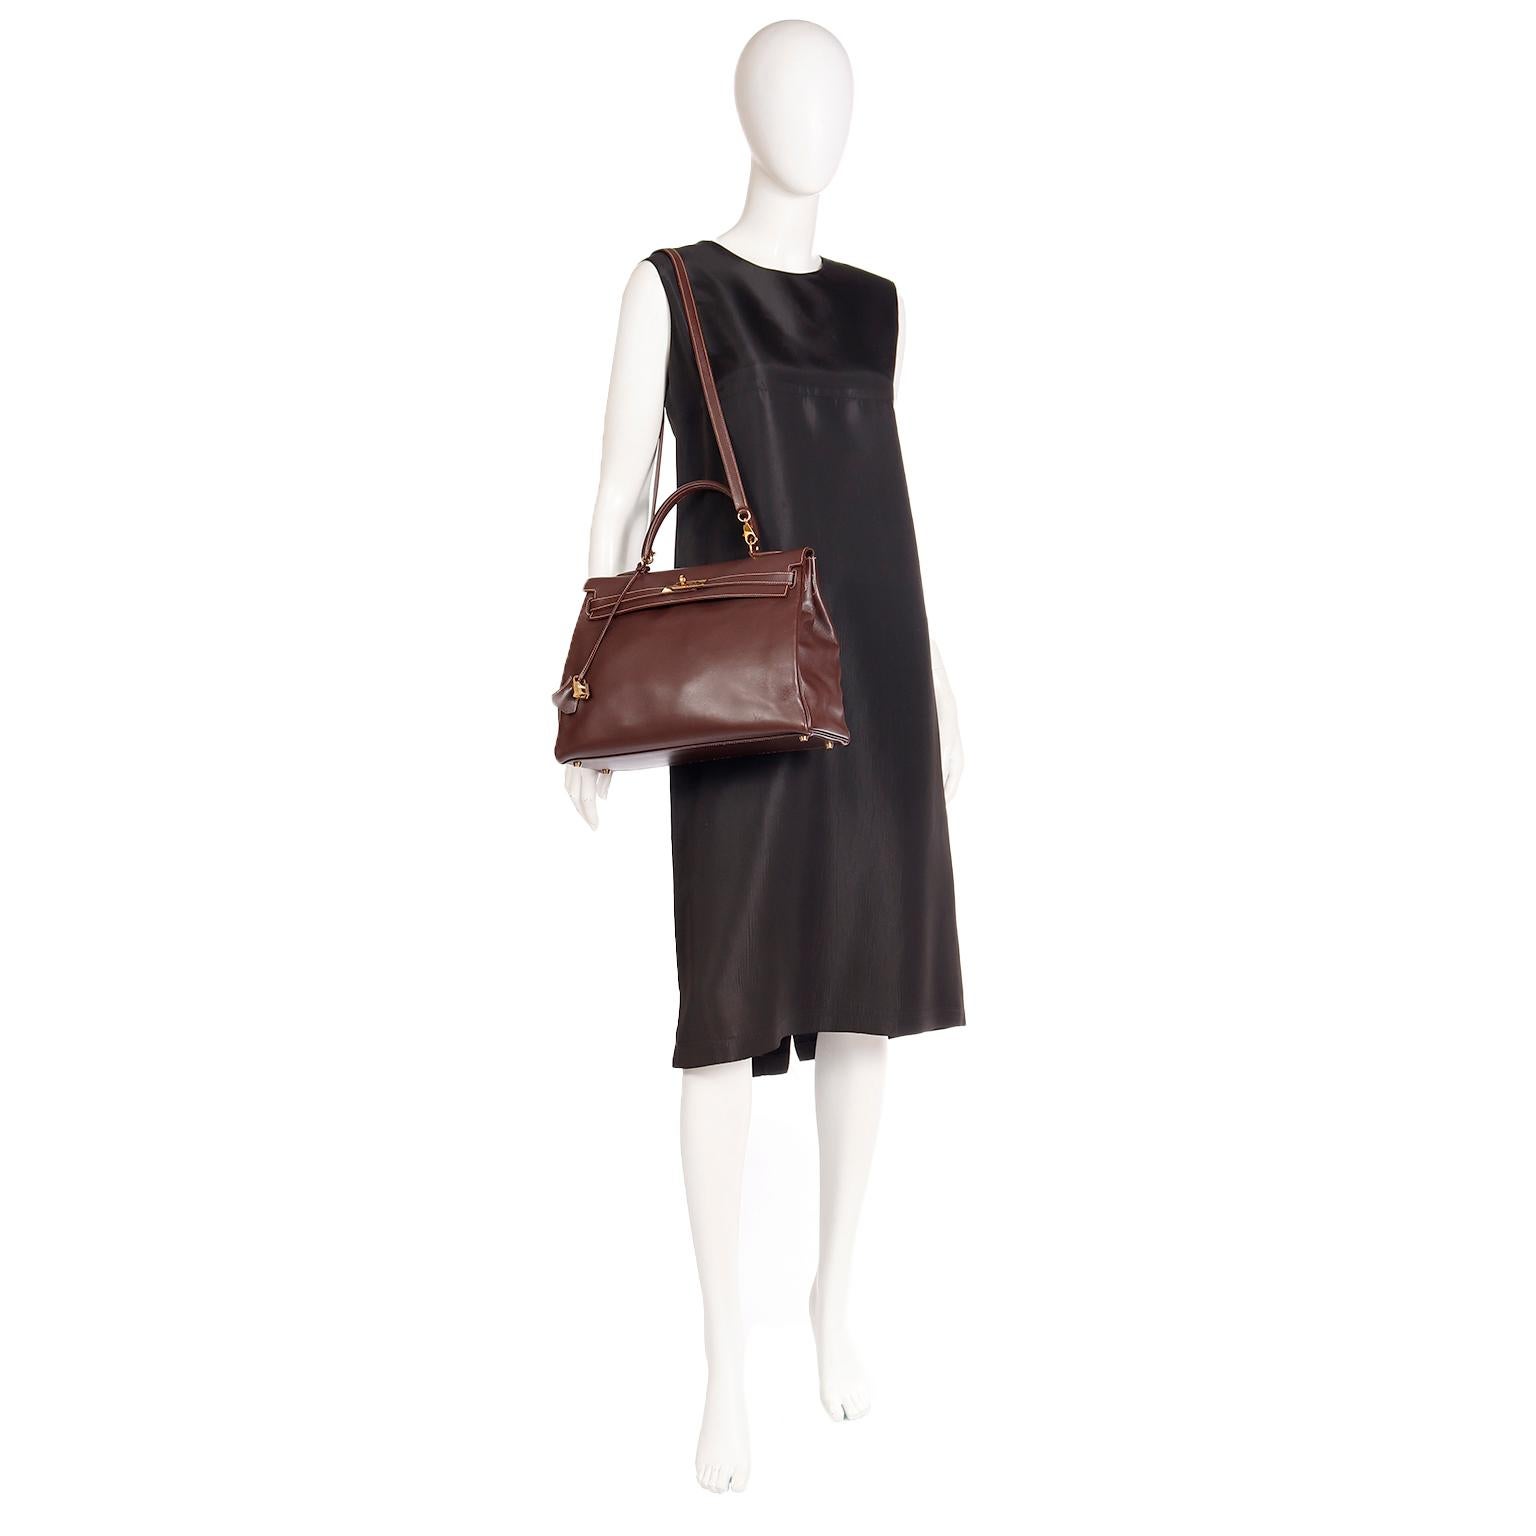 This timeless vintage Hermes Kelly 35 Retourne bag is in Havane Gulliver Leather, renowned for its unparalleled quality. We love the beautiful contrast of the rose poudre stitching on the deep, opulent brown leather. The gold plated hardware adds a